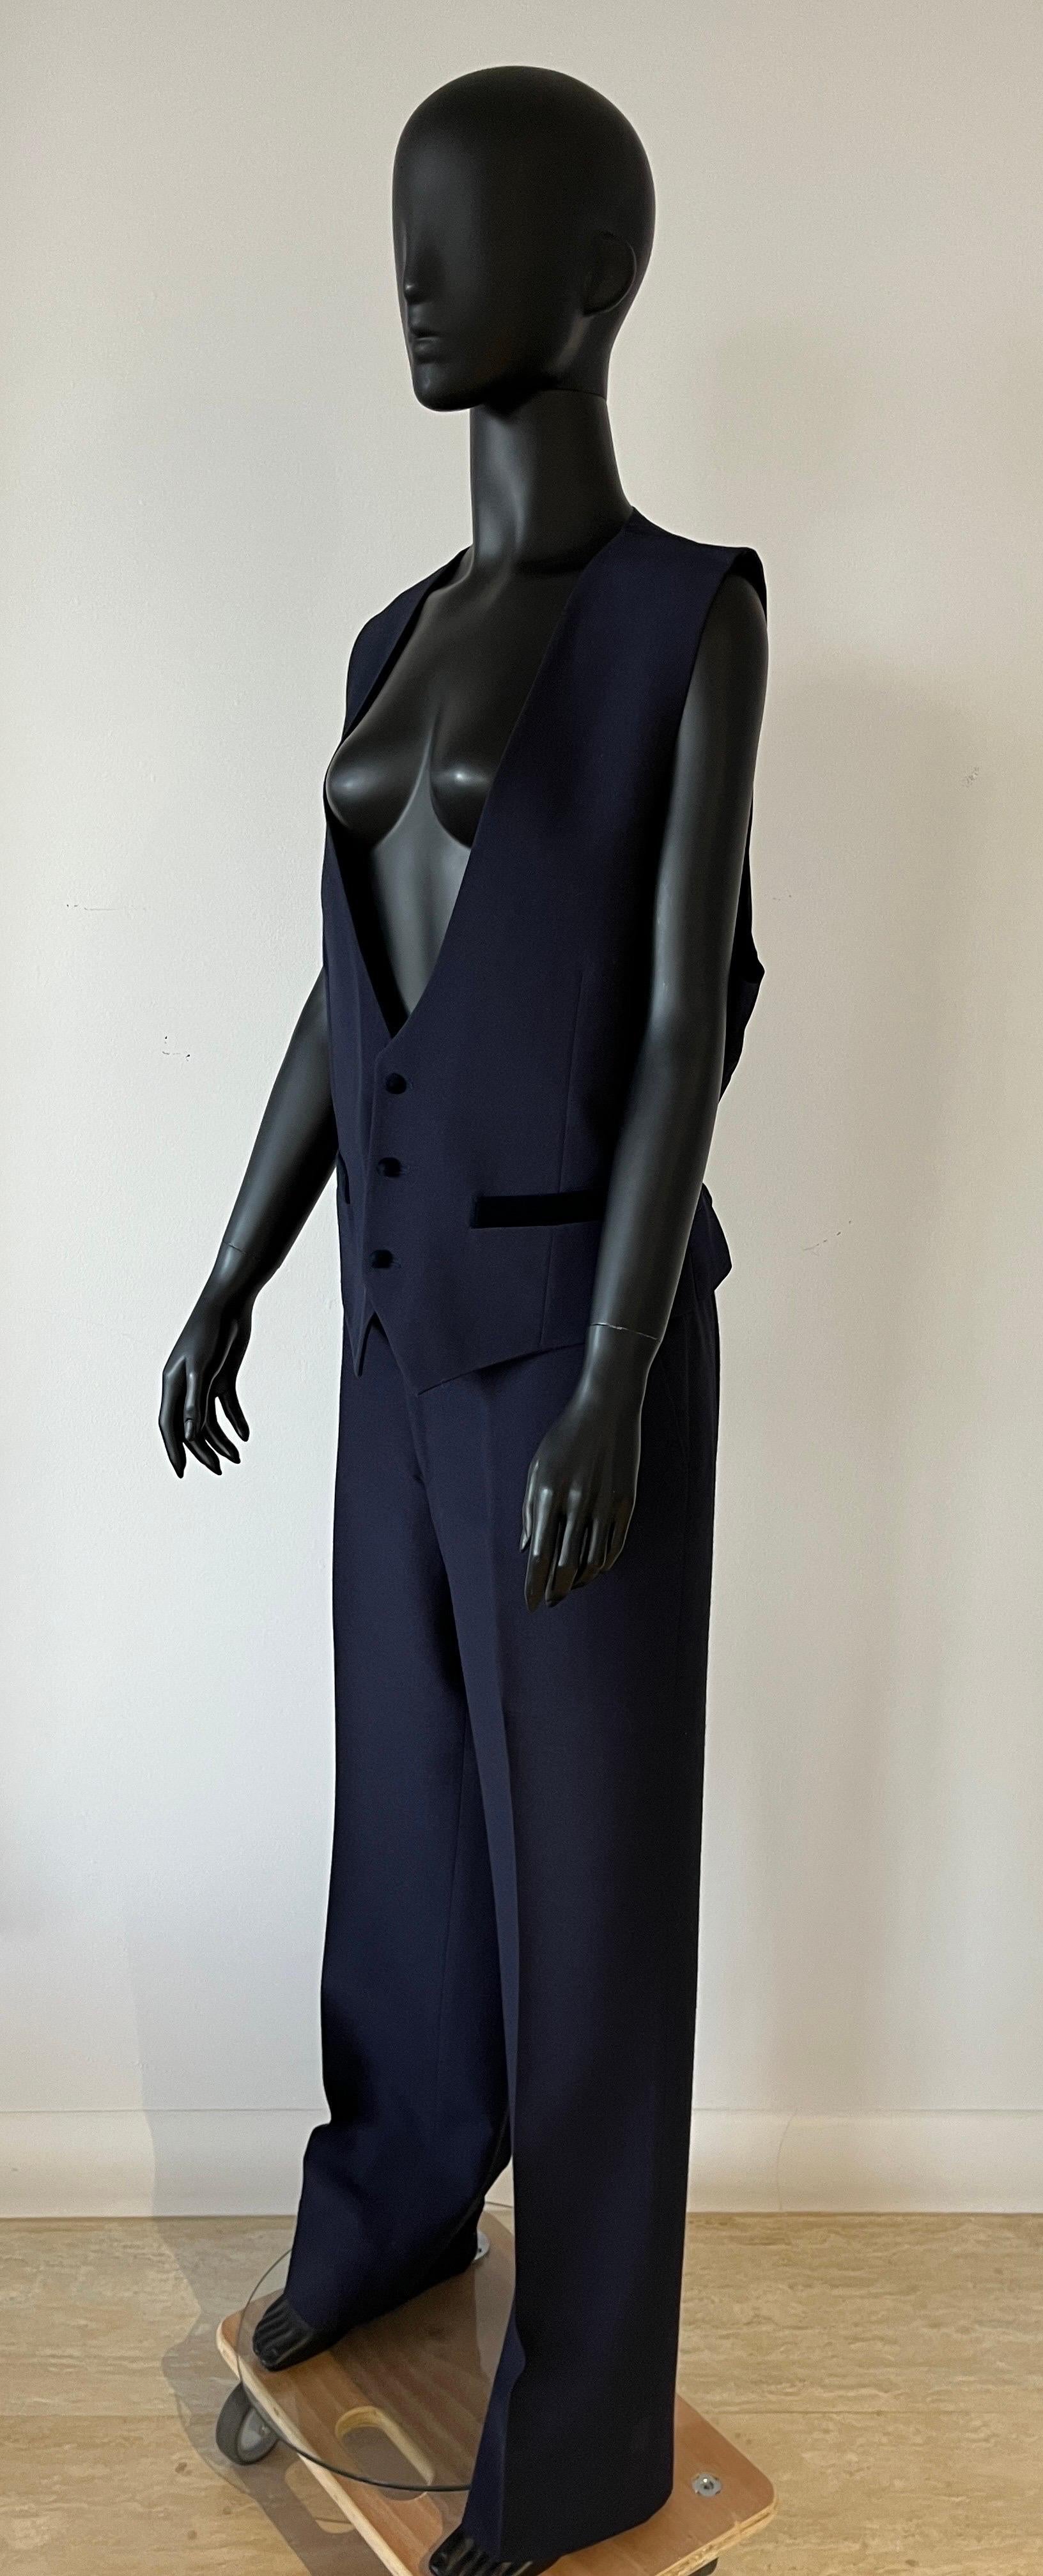 A super stylish vintage 1970’s mens navy wool 3 piece suit by Australian label Tony Barlow.

A great piece from the 70’s with wide velvet lapels.

Beautifully lined.

Made in Australia.

Size 44R

In excellent vintage condition 

Perfect gender